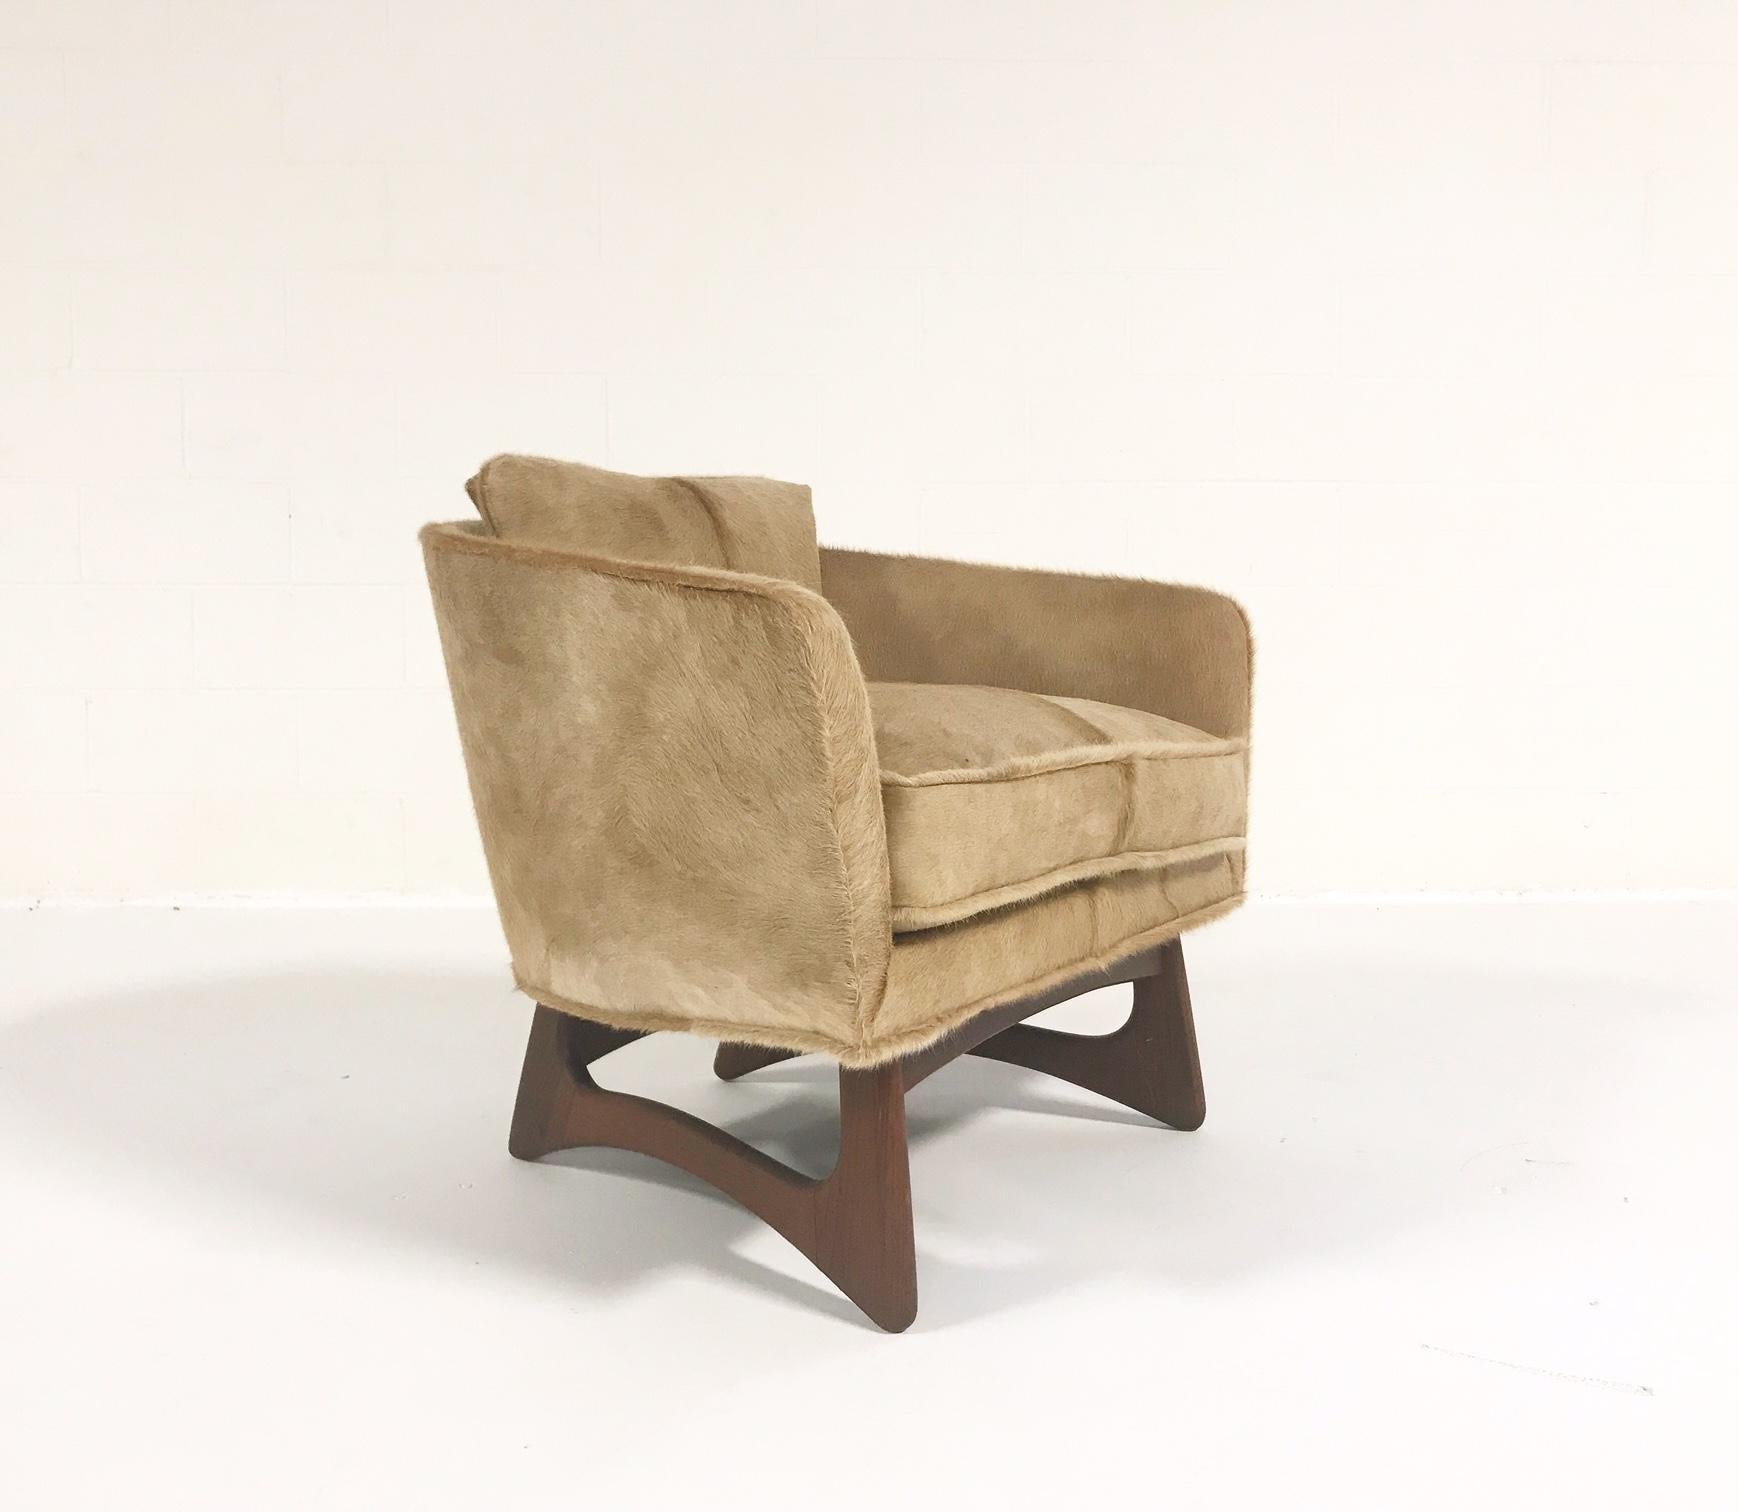 This chair is a favorite of our customers! Once we restore a vintage Adrian Pearsall lounge chair, we never seem to keep it in our showroom very long. And no wonder! The large, inviting seat, the beautiful walnut legs, the modern design. And,